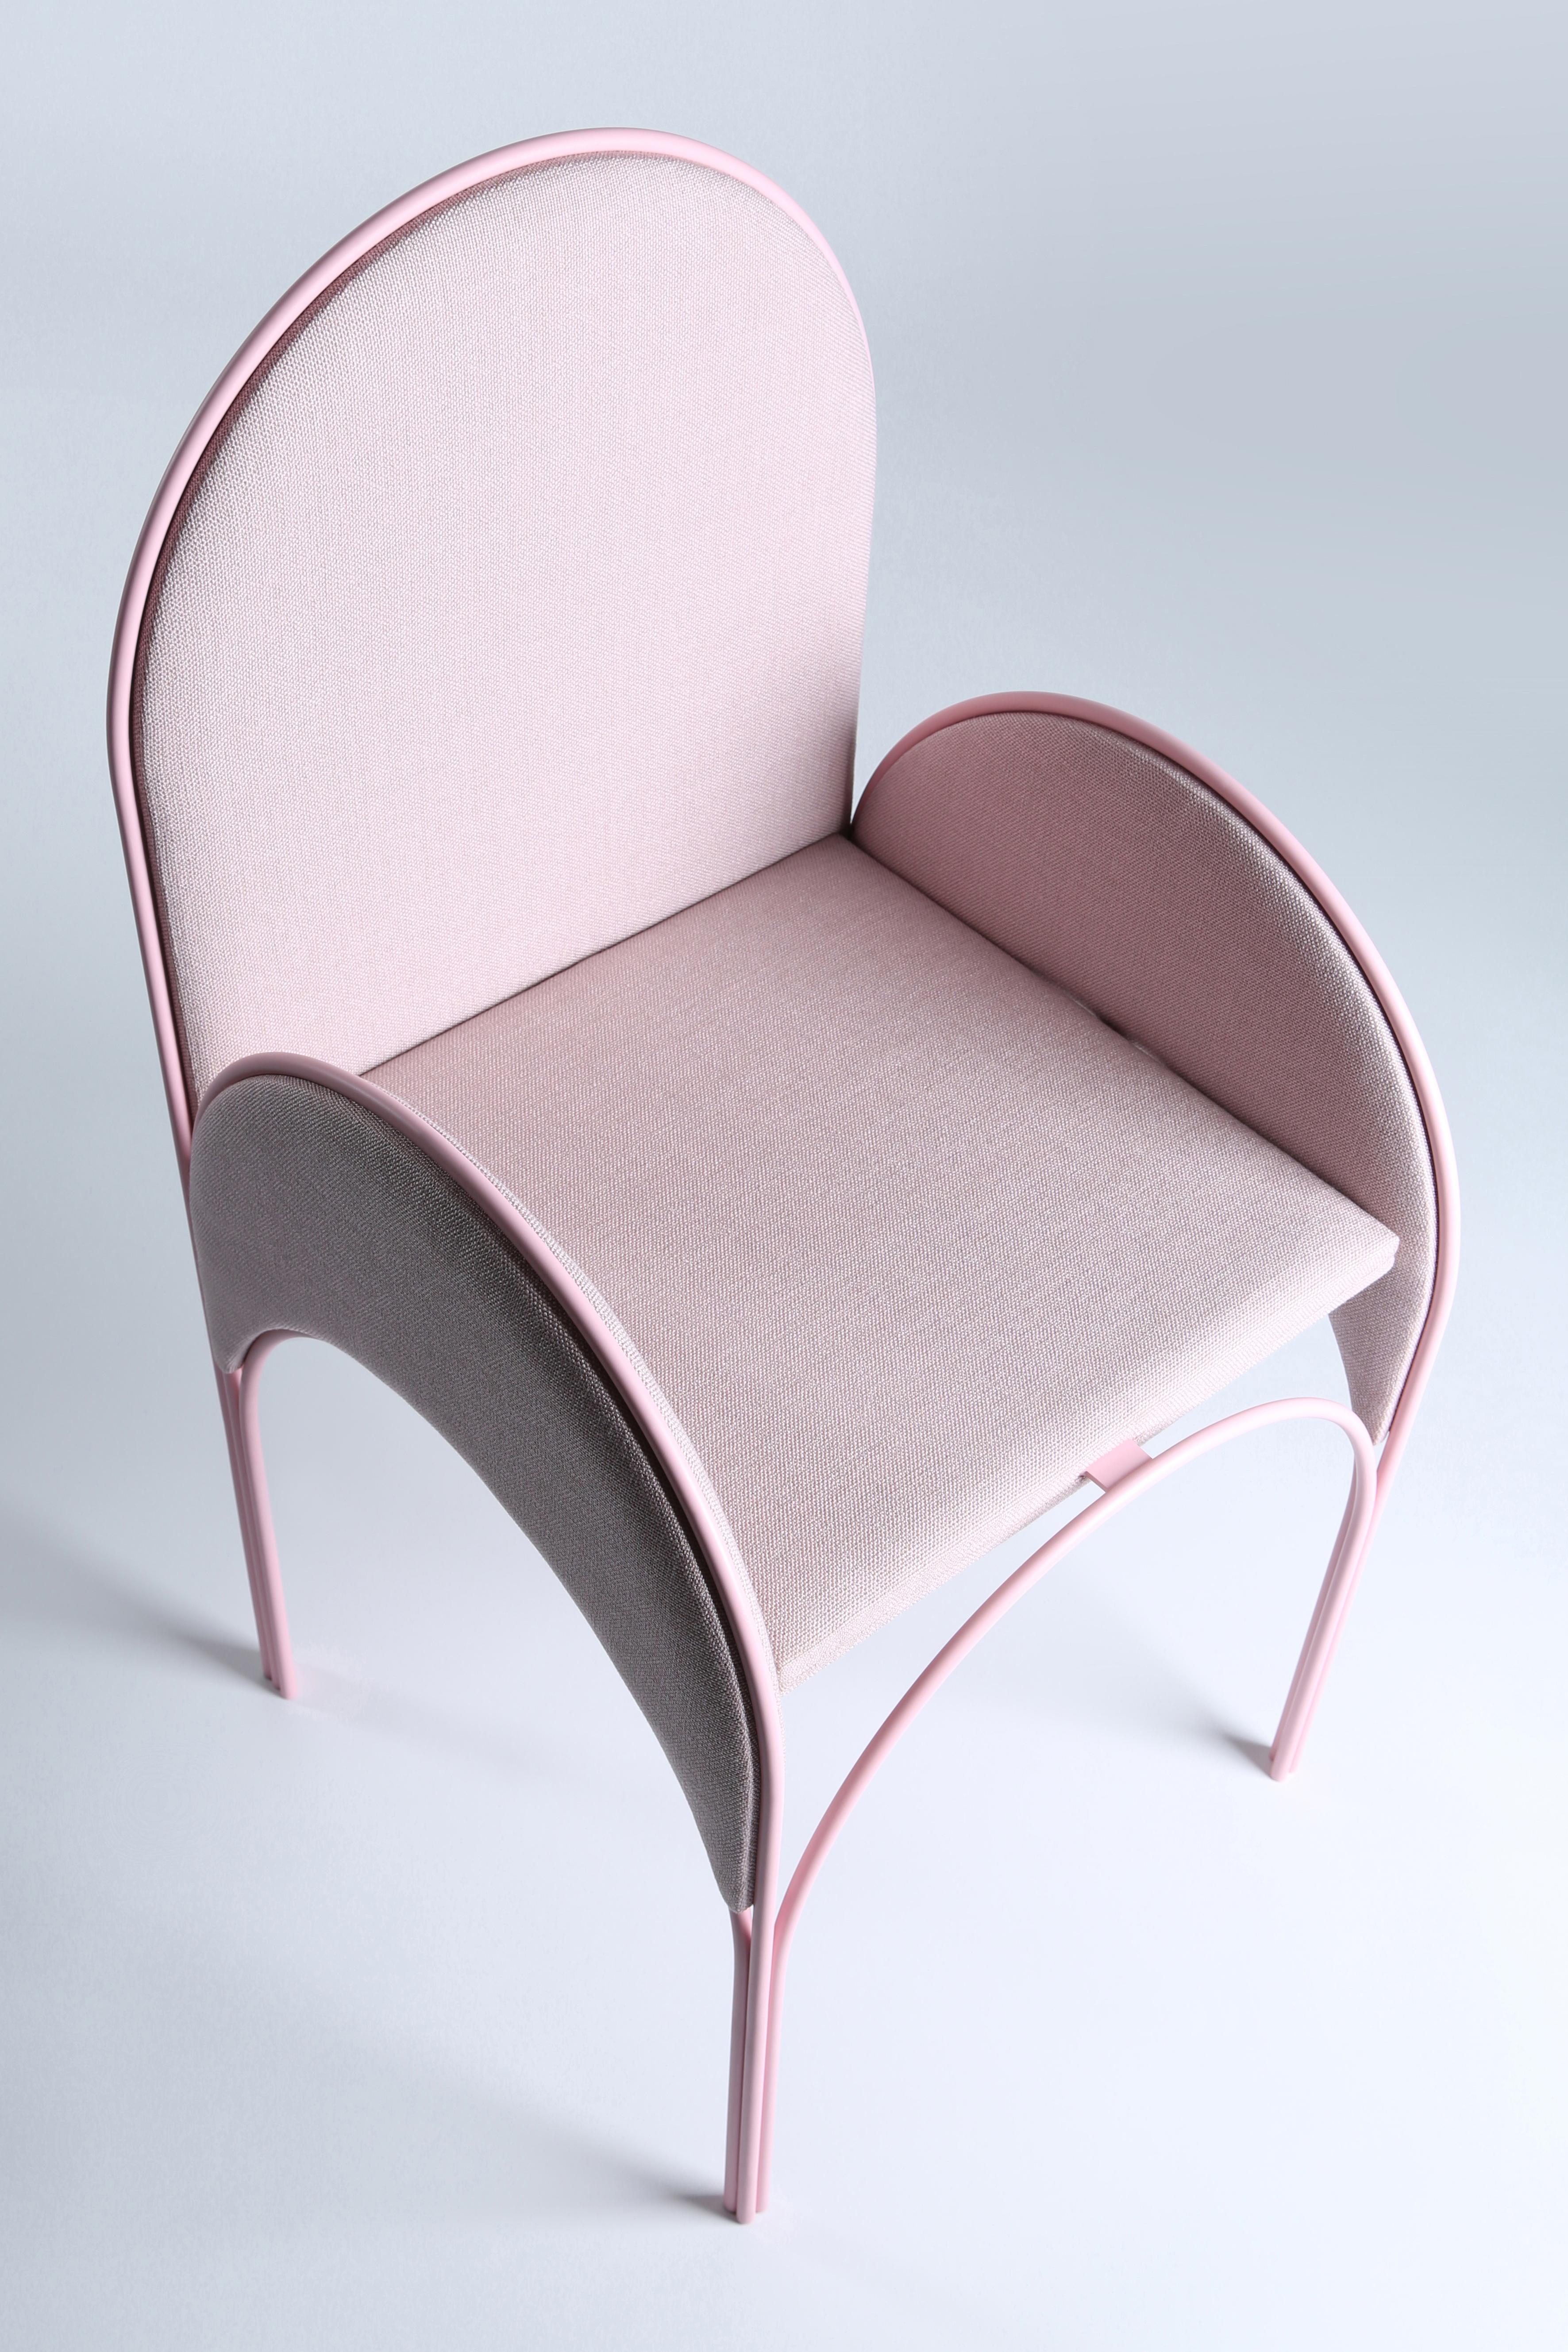 Contemporary Hawa Beirut Naked Chair by Richard Yasmine For Sale